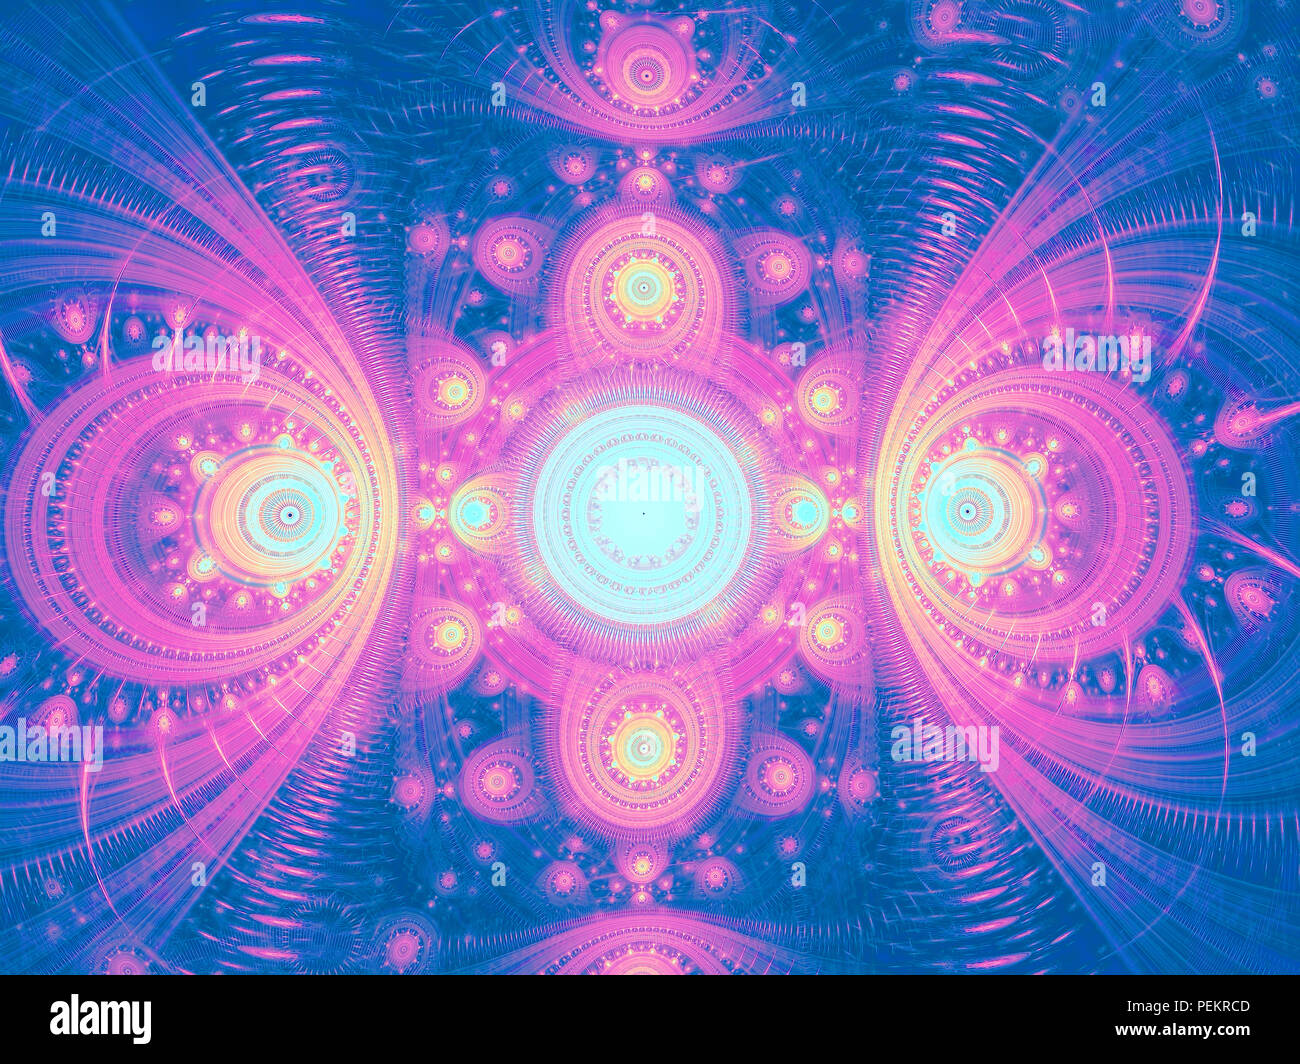 Abstract blue and purple pattern - digitally generated image Stock Photo